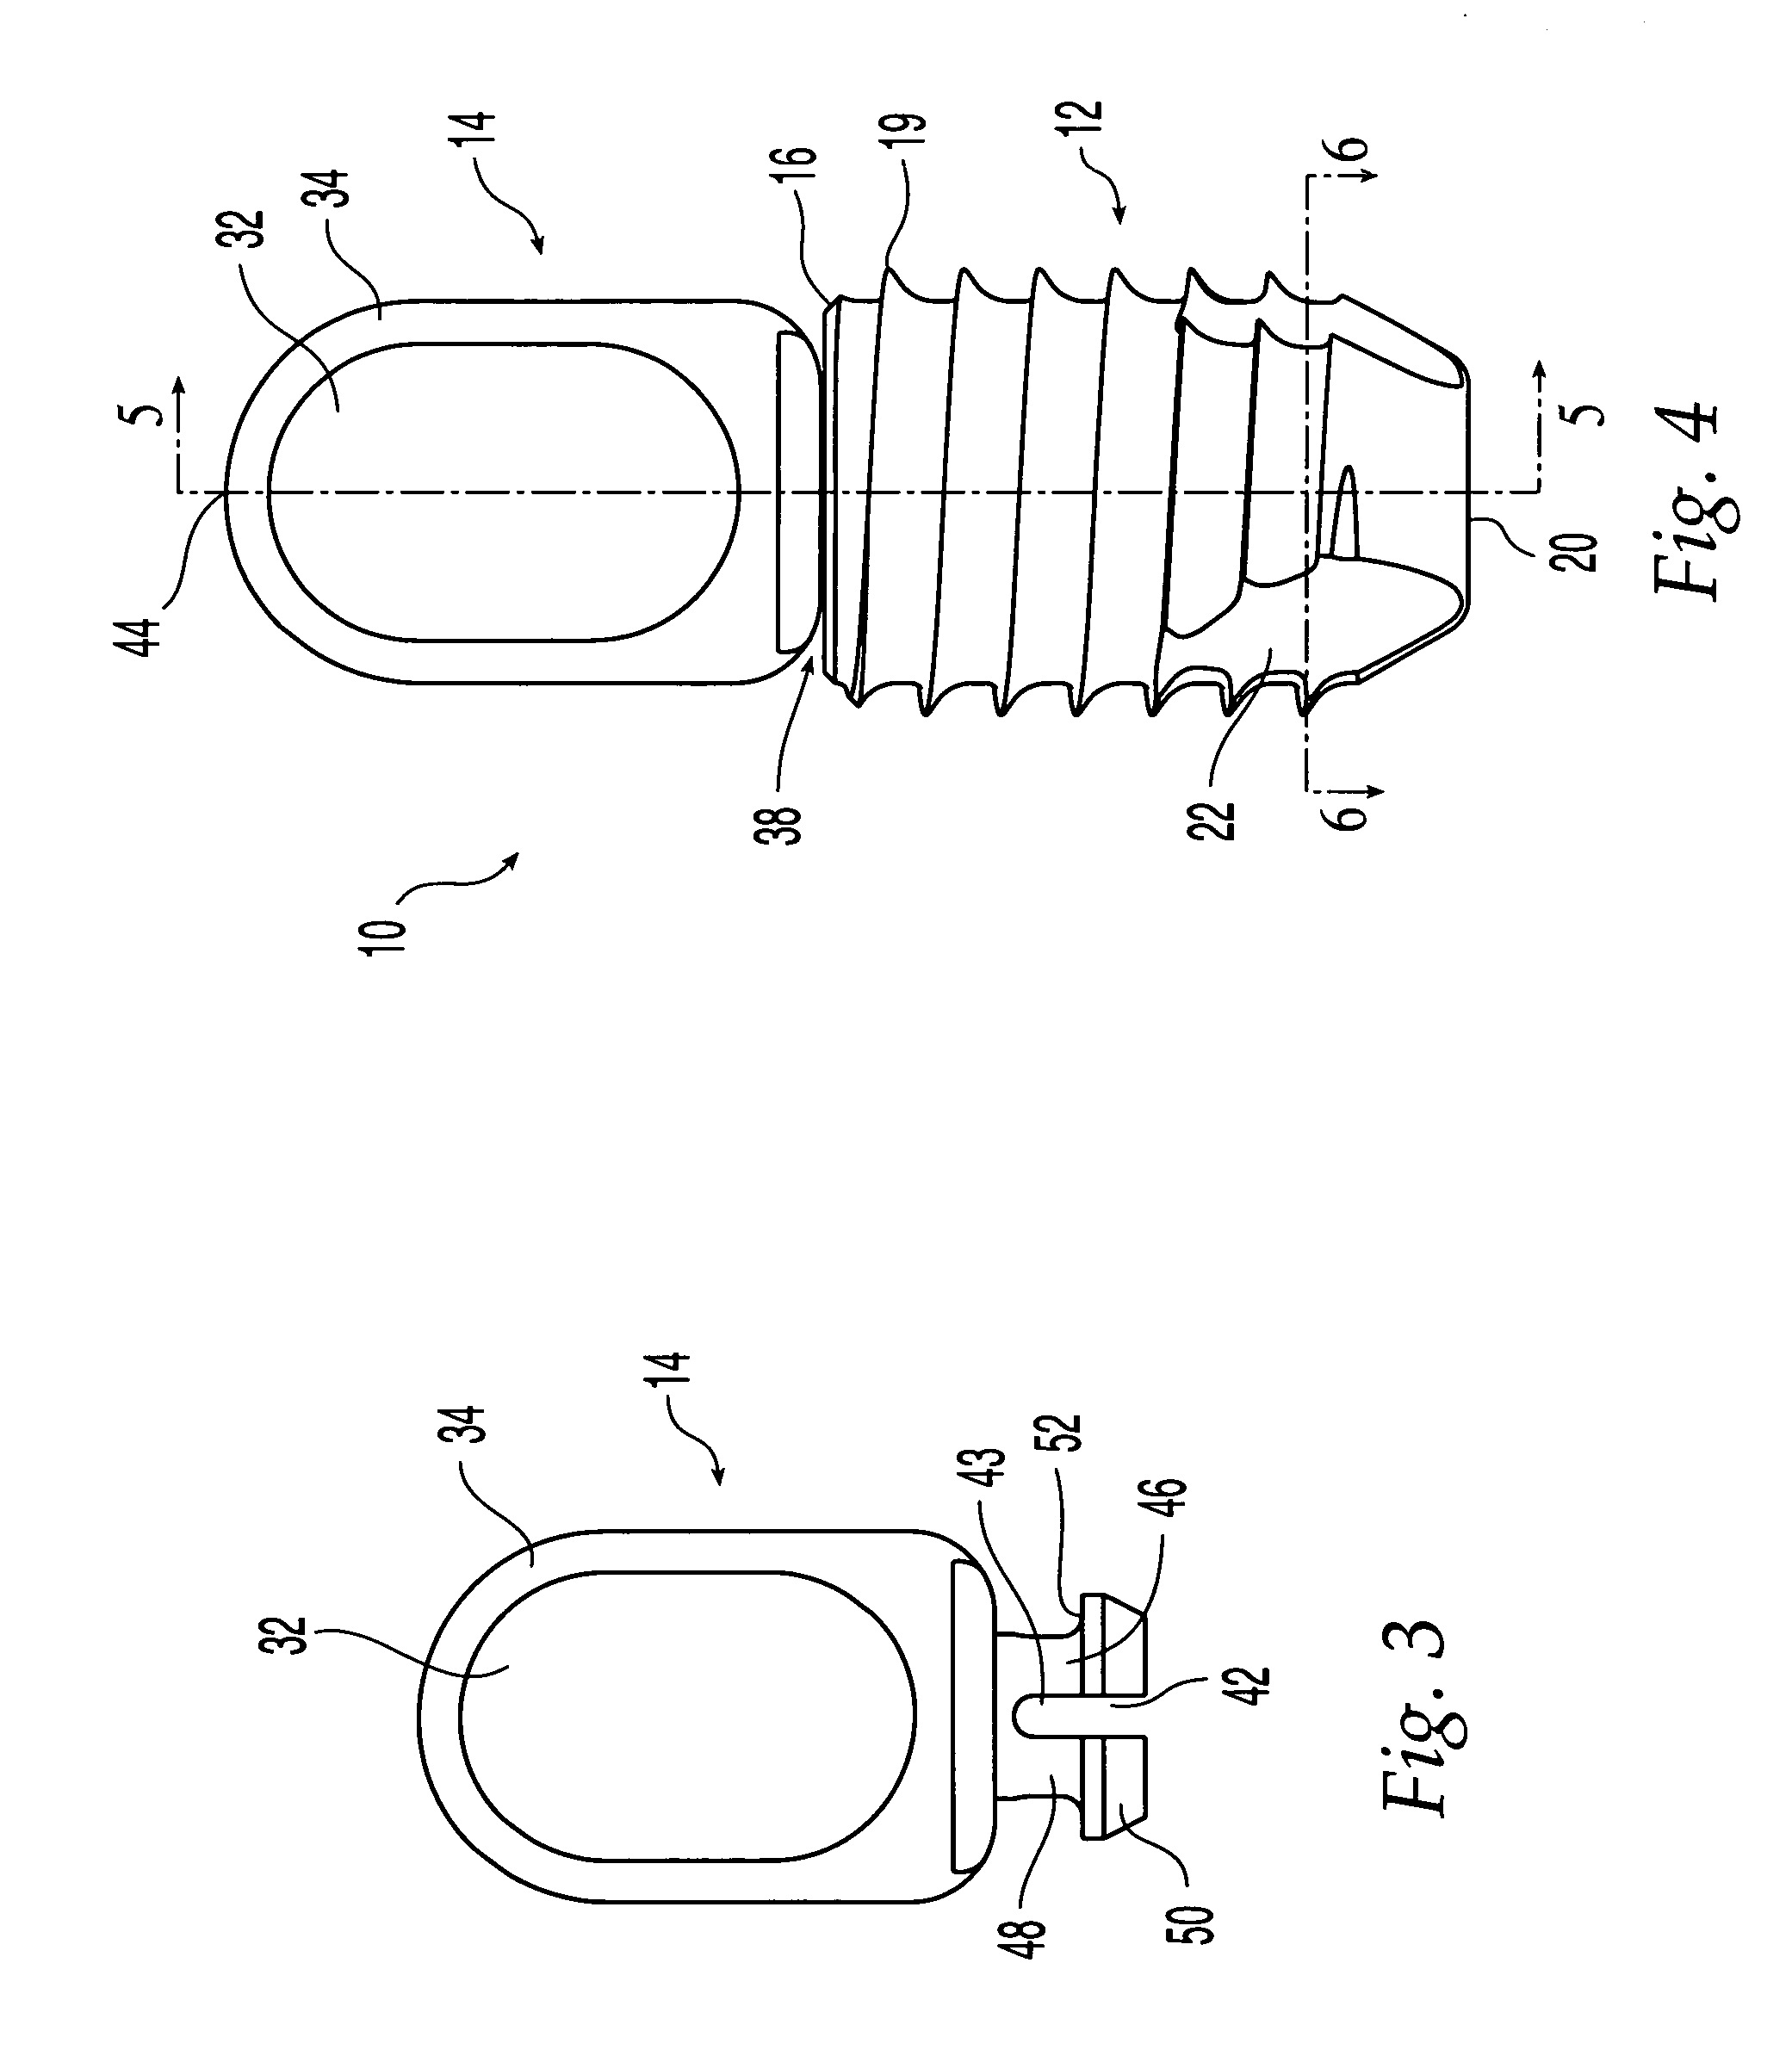 Graft fixation system and method